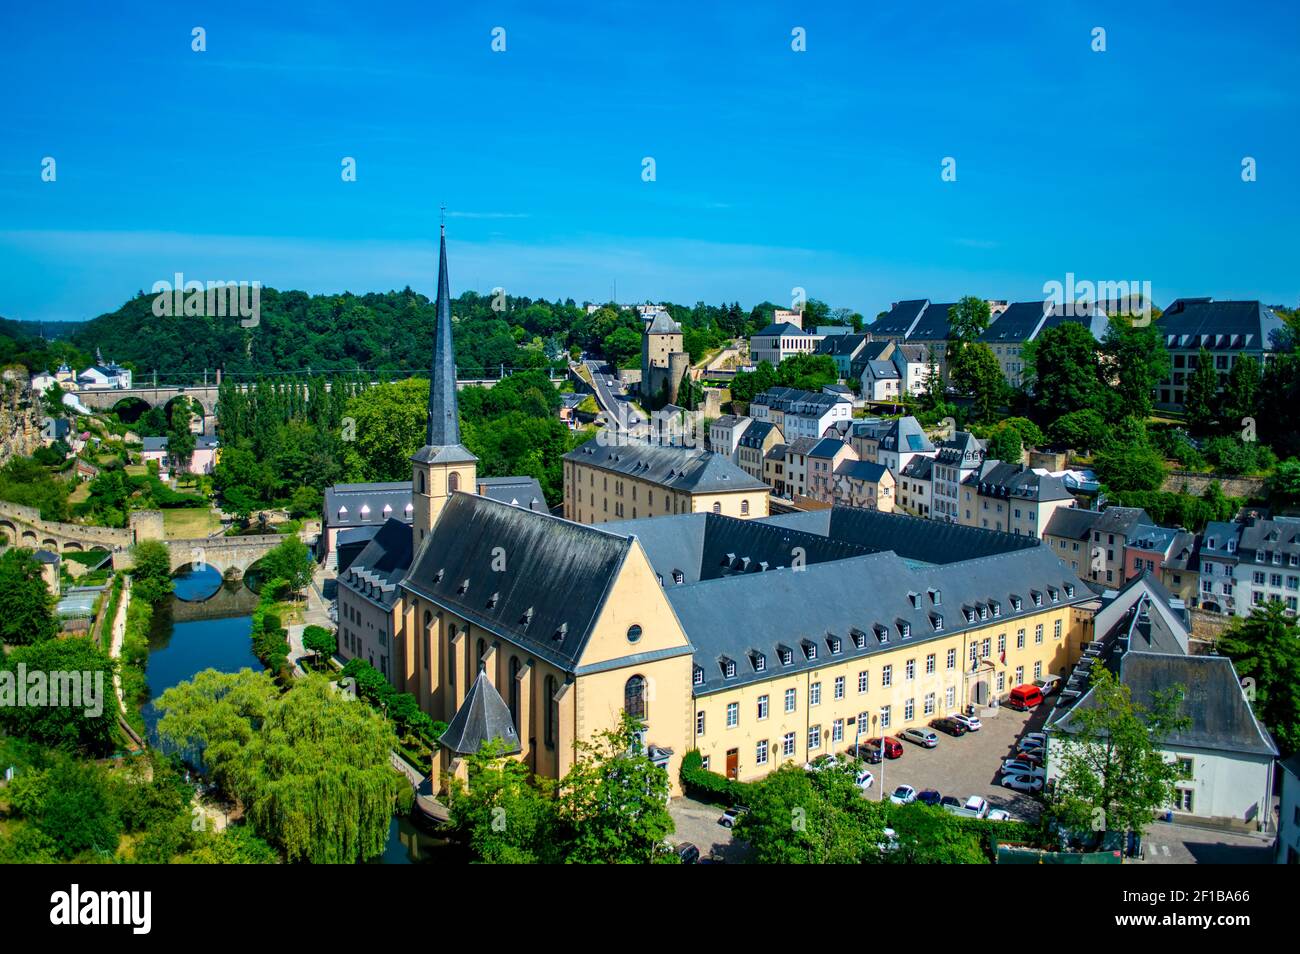 Luxembourg city, Luxembourg - July 16, 2019: Cityscape of Luxembourg Old Town in Europe Stock Photo